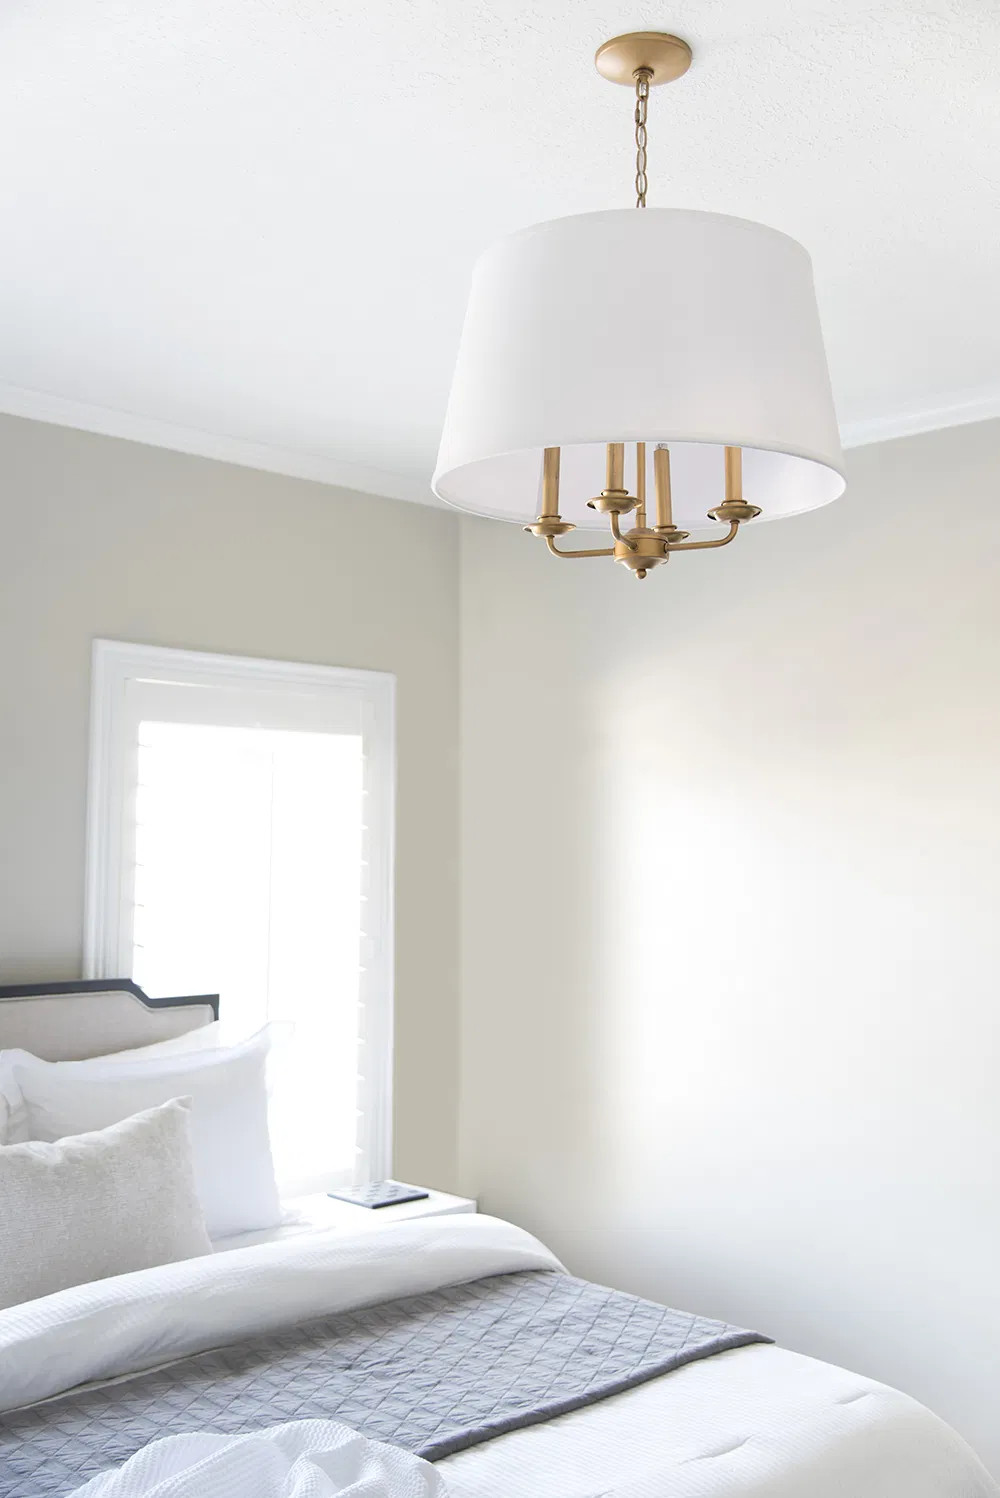 Bedroom Light Fixtures Lowes
 Swapping Our Builder Grade Lights The Best Fixtures From